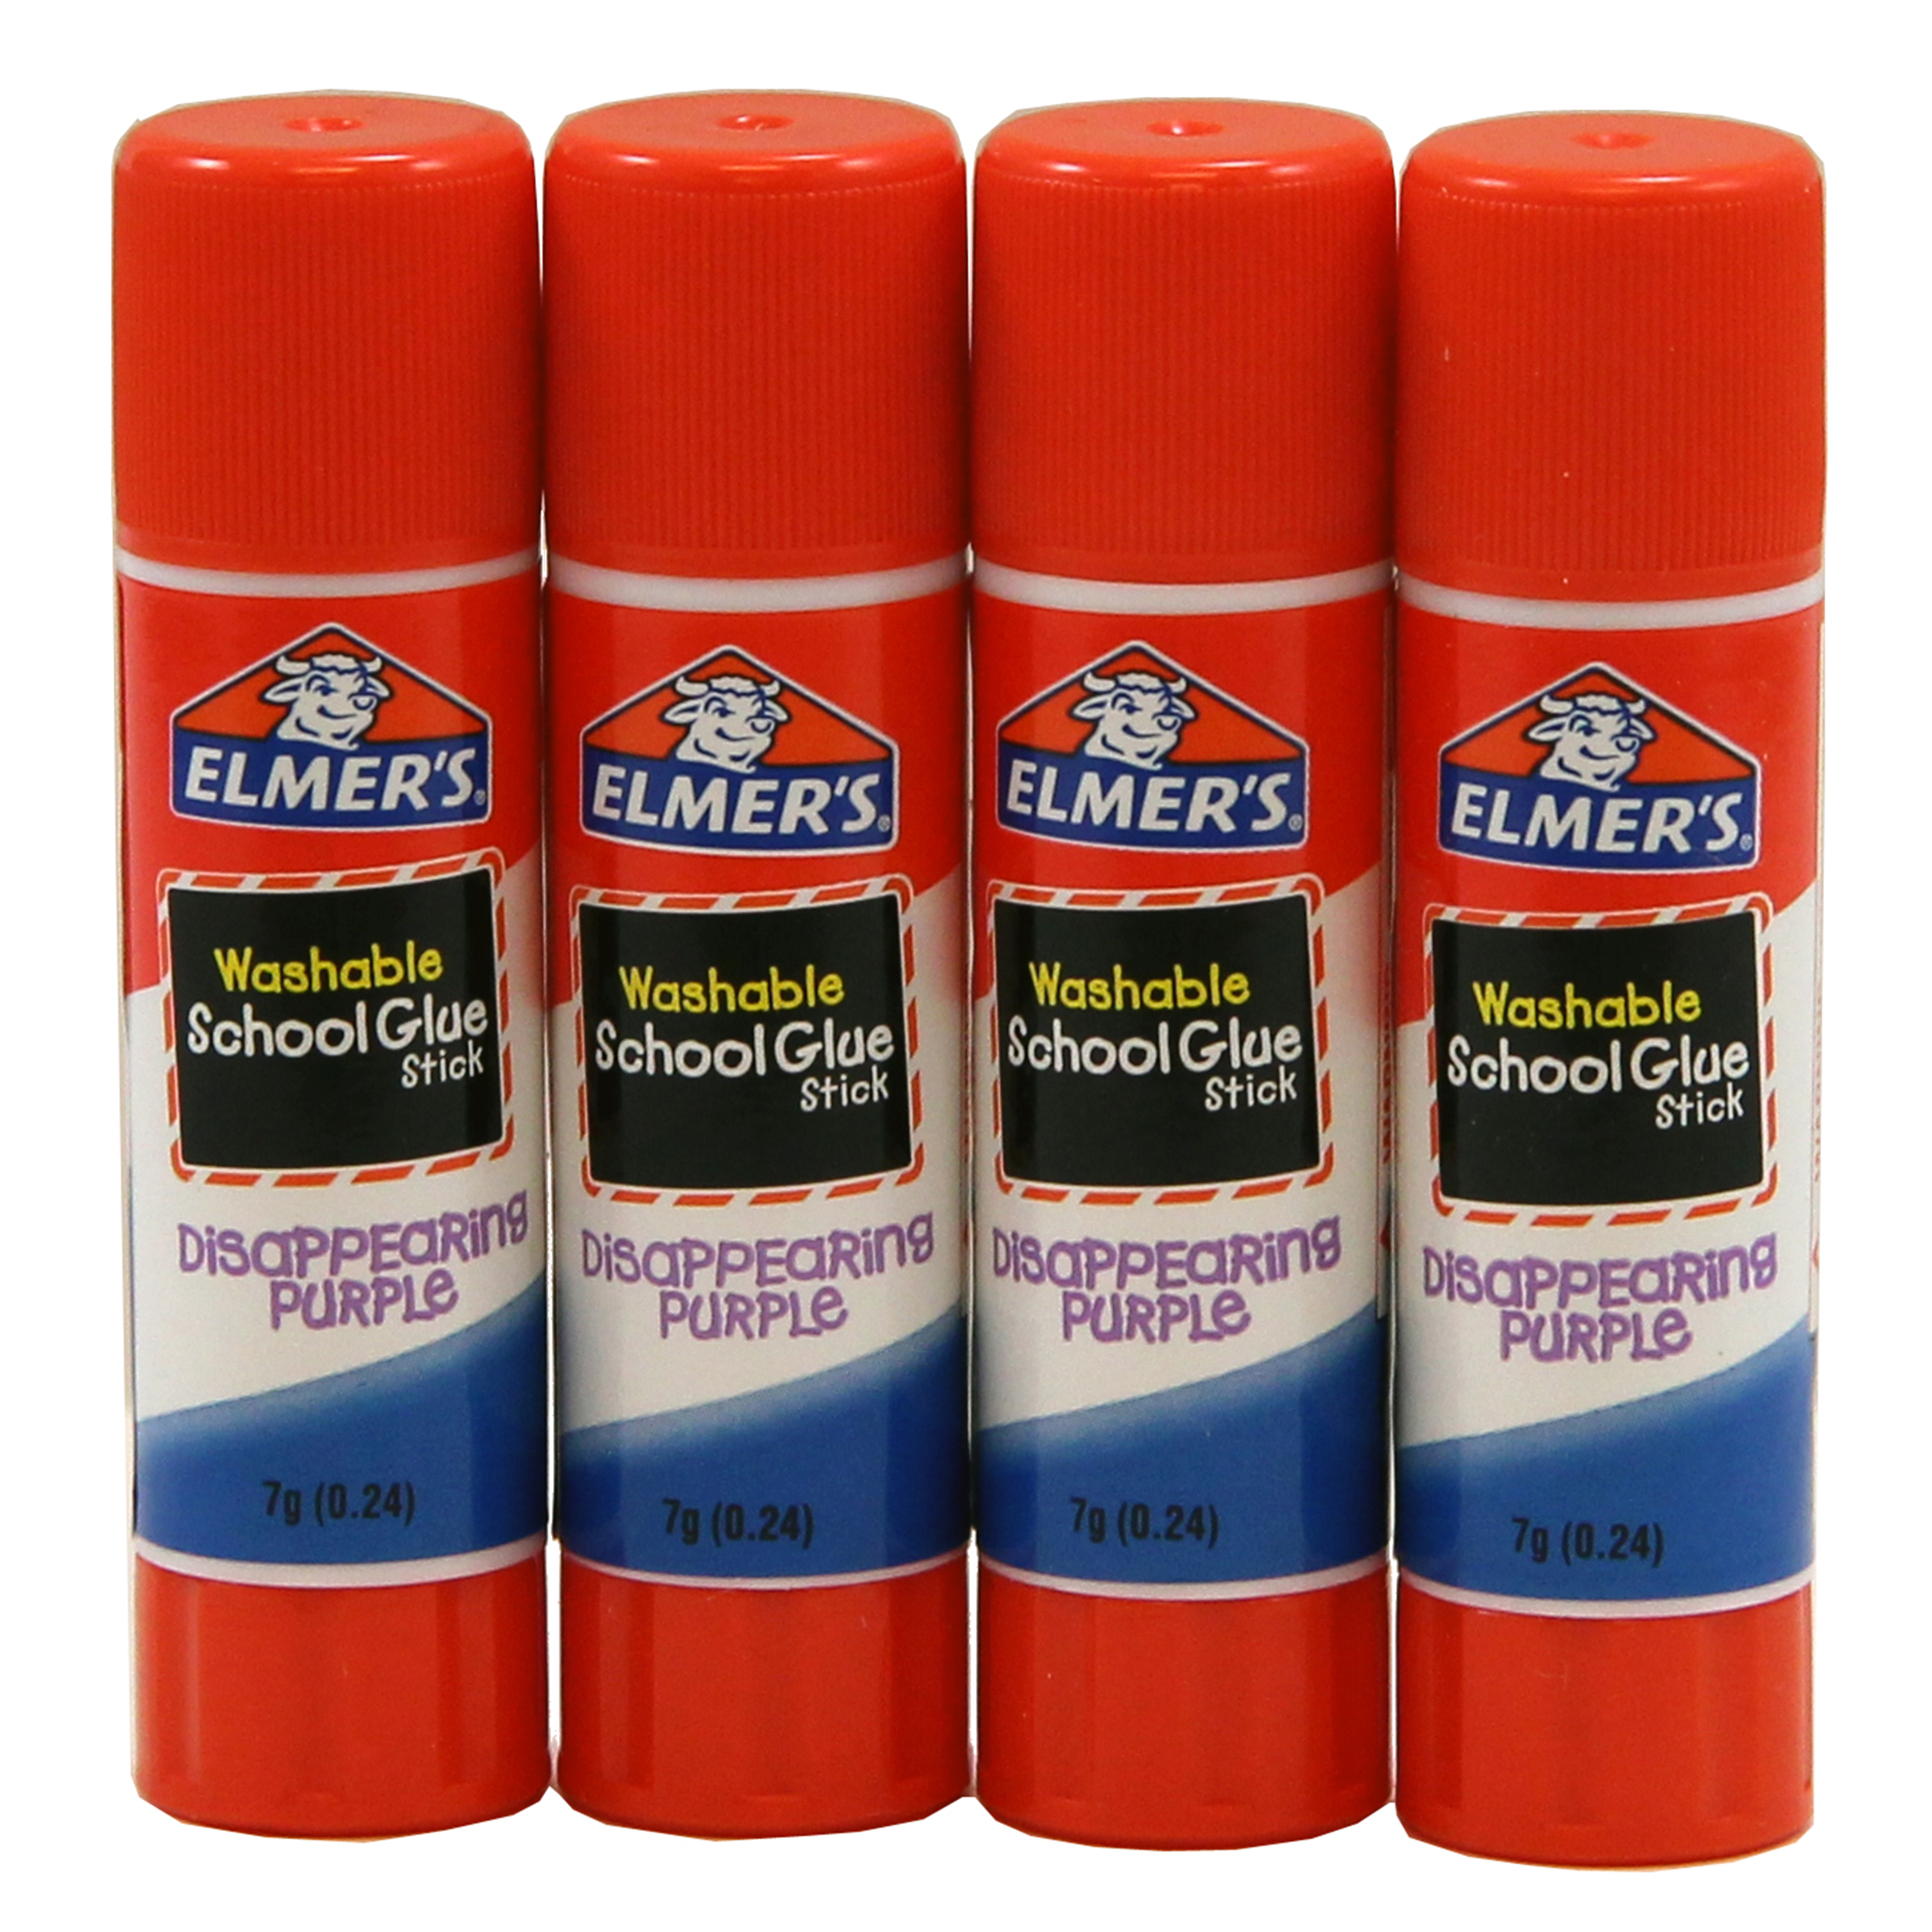 Elmer's Disappearing Purple School Glue Sticks, Washable, 7g (0.24 oz), 4 Count - image 3 of 5